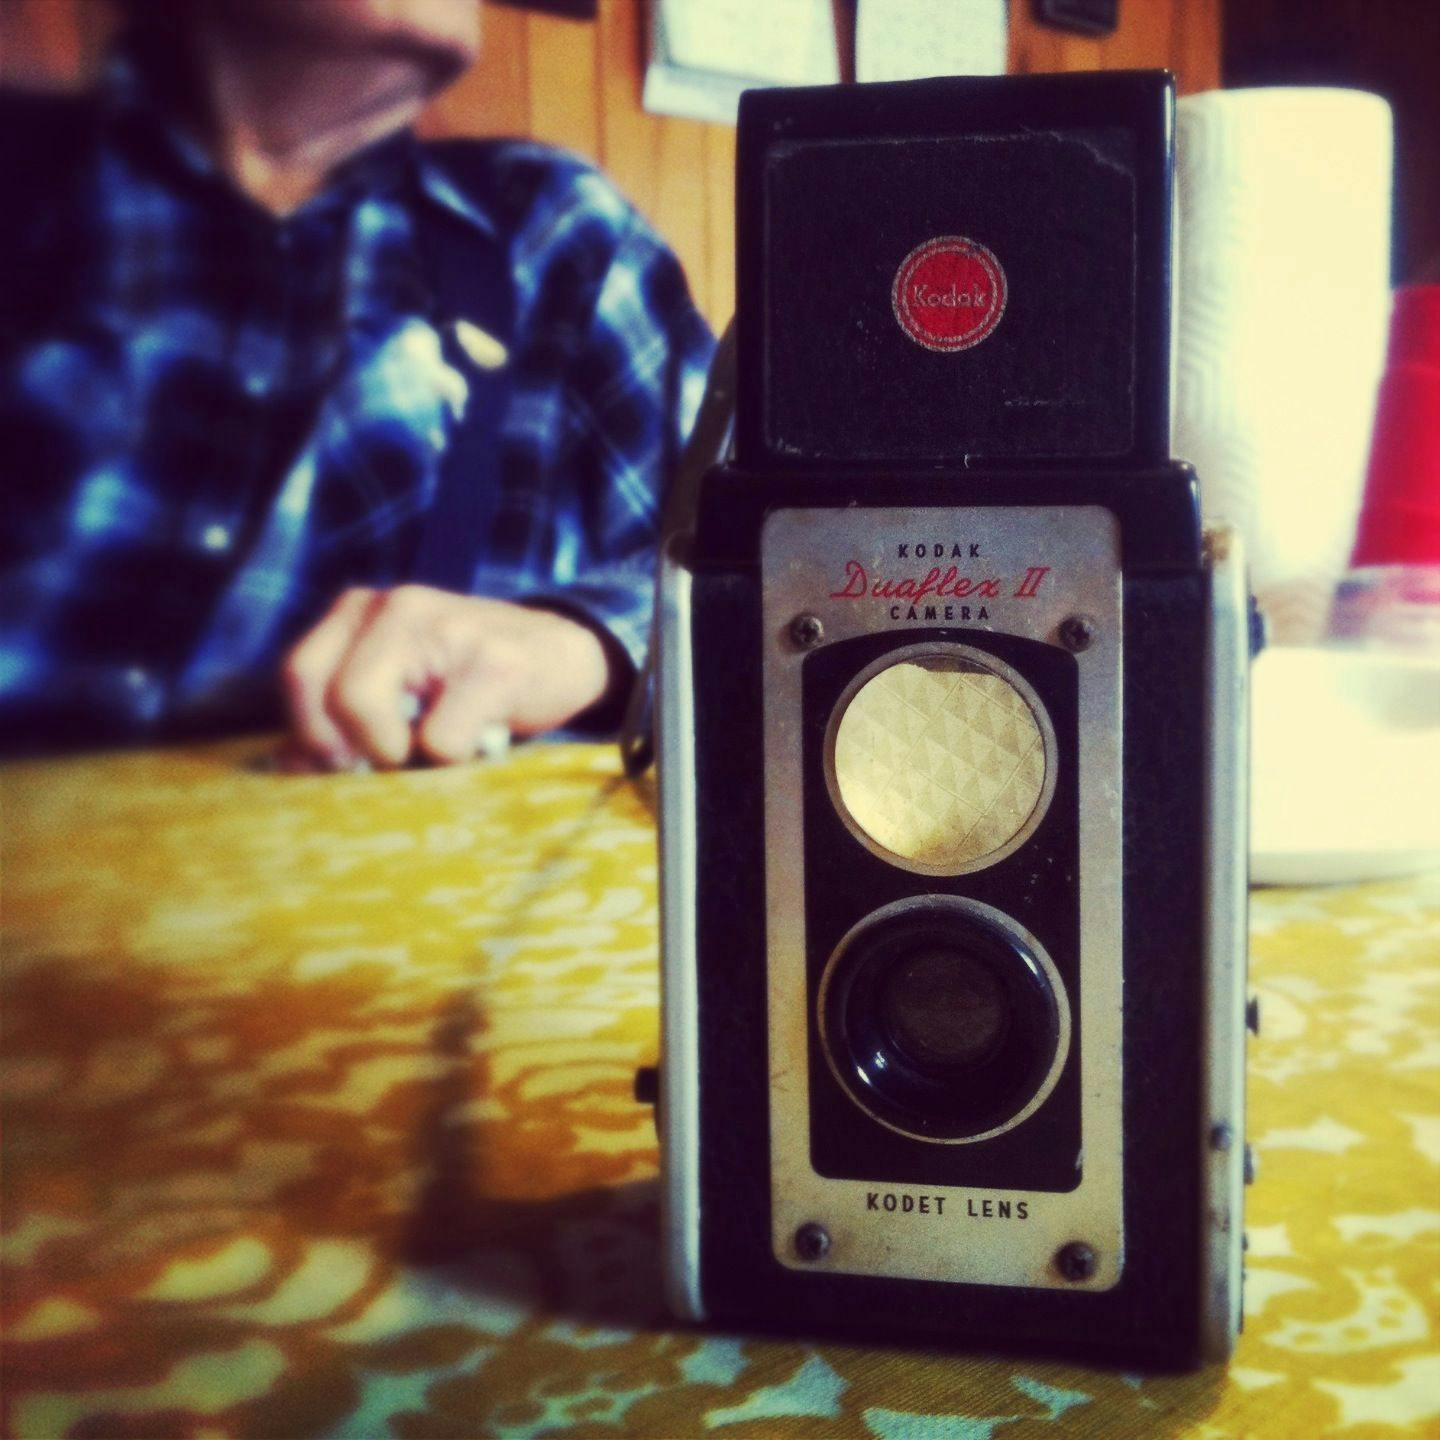 A vintage Kodak camera placed on a dining table, with Casey's grandpa
sitting in the background.